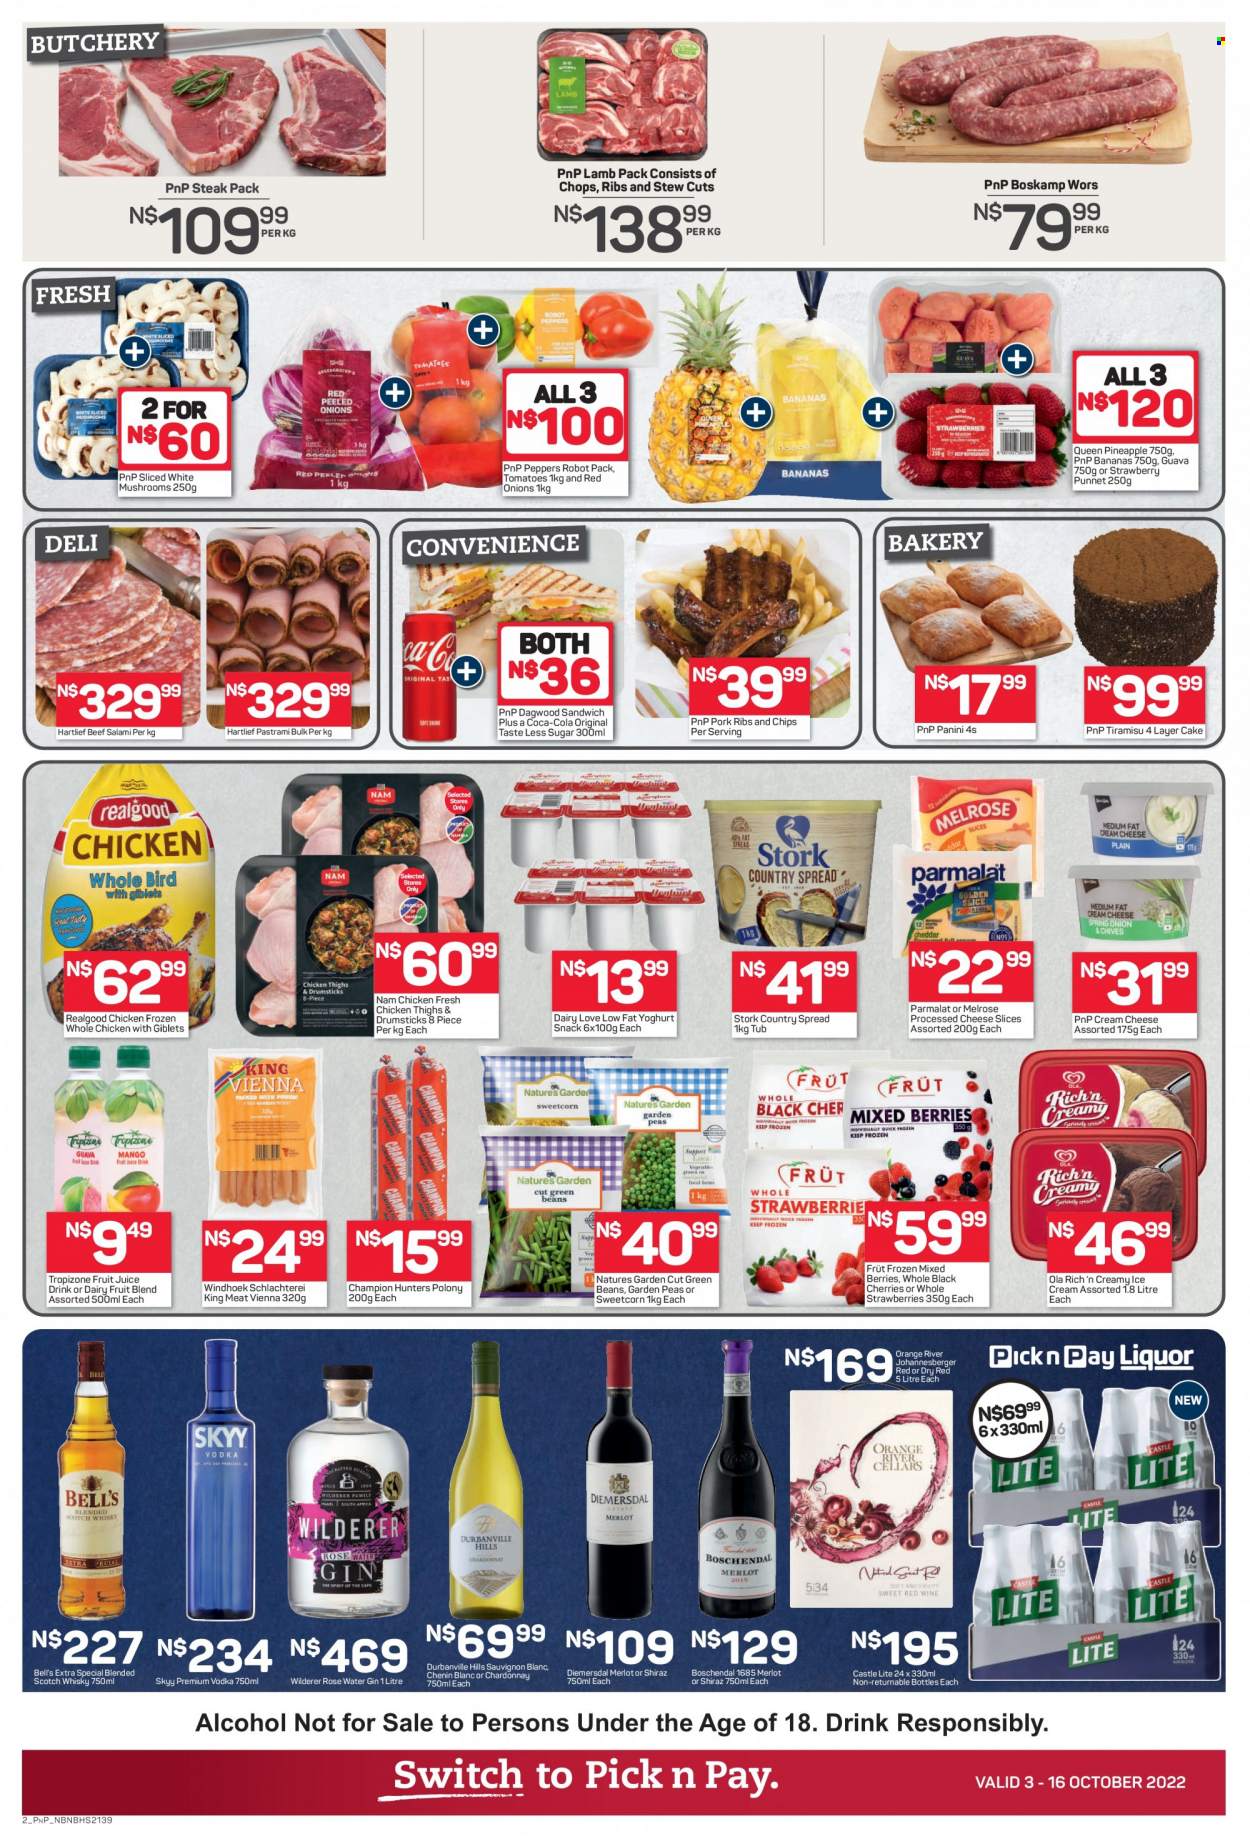 thumbnail - Pick n Pay catalogue  - 03/10/2022 - 16/10/2022 - Sales products - mushrooms, panini, tiramisu, green beans, tomatoes, peas, peppers, onion, guava, strawberries, pineapple, cherries, oranges, sandwich, dagwood, salami, pastrami, polony, cream cheese, sliced cheese, cheese, Melrose, yoghurt, Parmalat, ice cream, Ola, Natures Garden, snack, Coca-Cola, switch, fruit juice, juice, red wine, white wine, Chardonnay, wine, Merlot, alcohol, Chenin Blanc, Shiraz, Diemersdal, Sauvignon Blanc, rosé wine, gin, vodka, SKYY, scotch whisky, whisky, Castle, whole chicken, chicken thighs, beef meat, steak, pork meat, pork ribs, Hill's. Page 3.